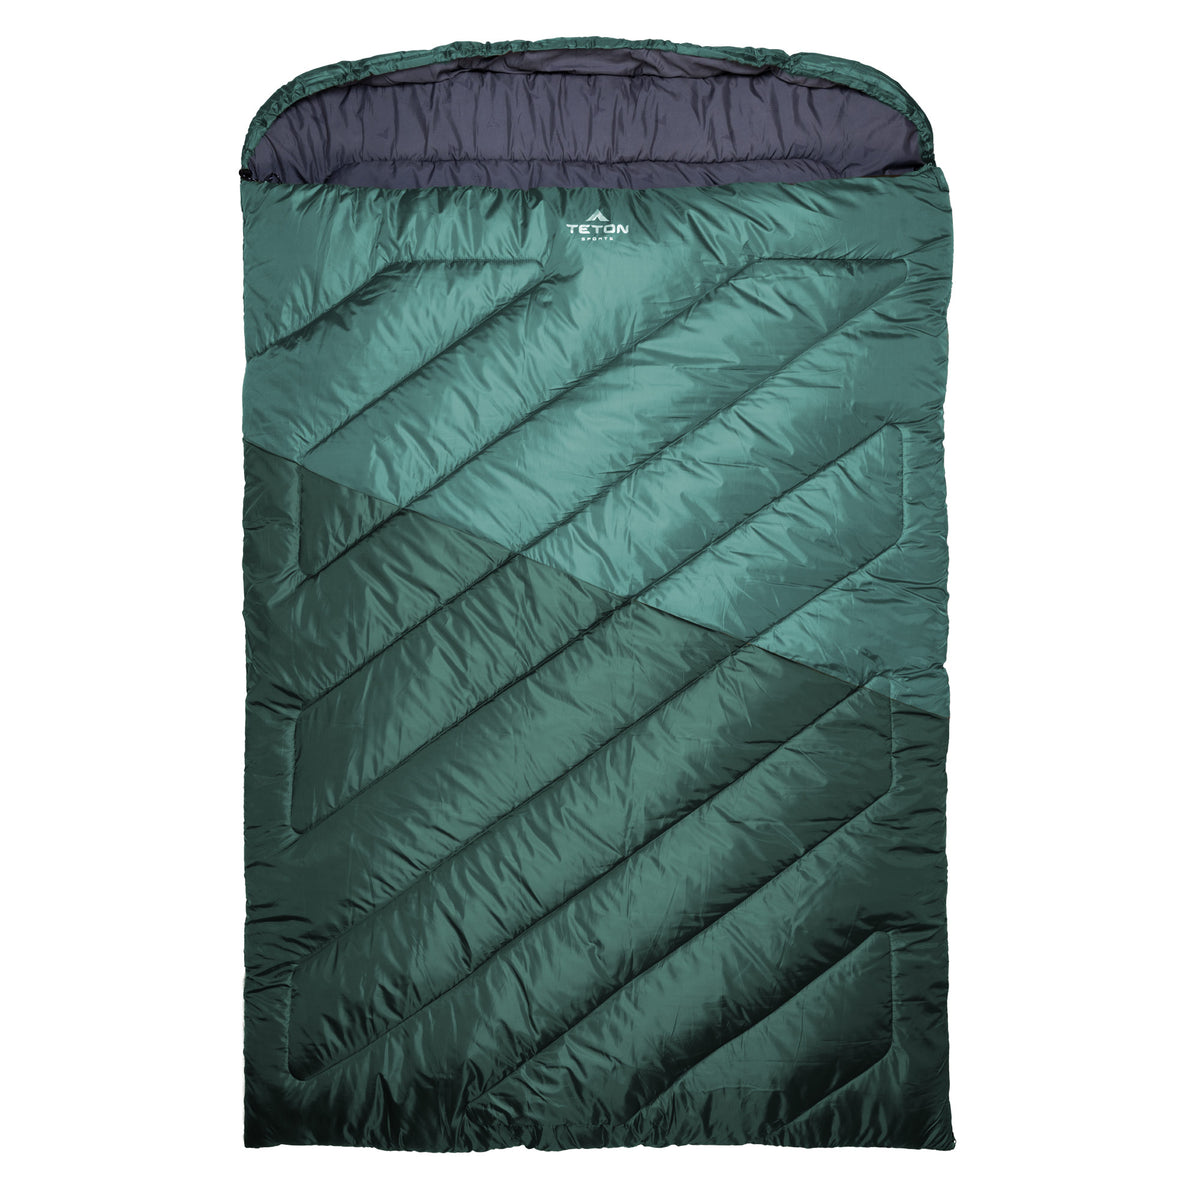 Celsius Mammoth Double 20°F / -7°C Sleeping Bag